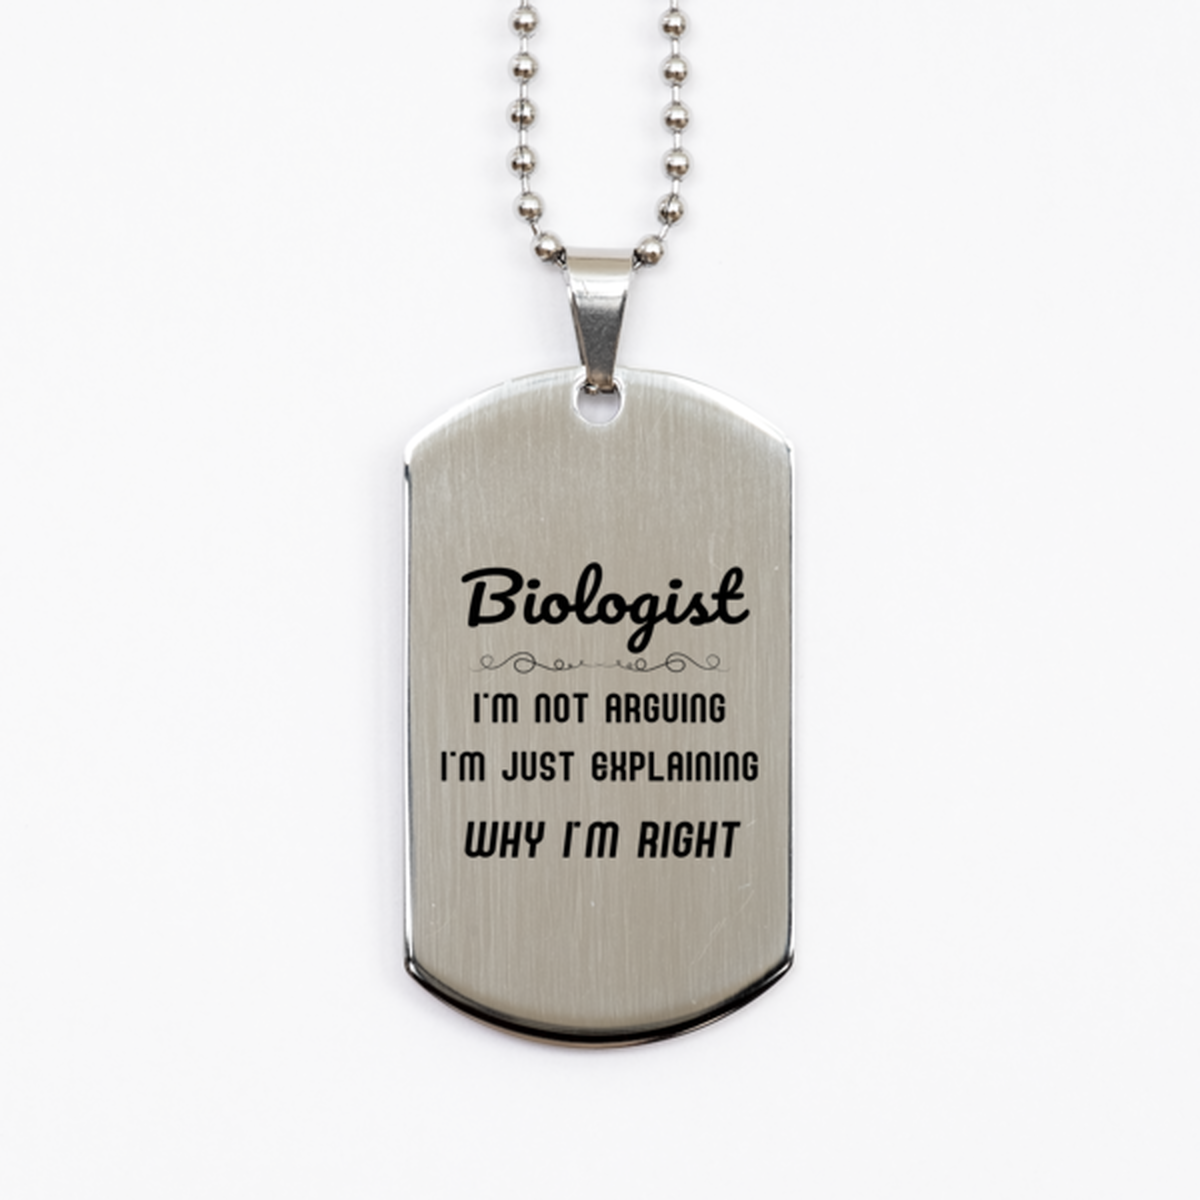 Biologist I'm not Arguing. I'm Just Explaining Why I'm RIGHT Silver Dog Tag, Funny Saying Quote Biologist Gifts For Biologist Graduation Birthday Christmas Gifts for Men Women Coworker